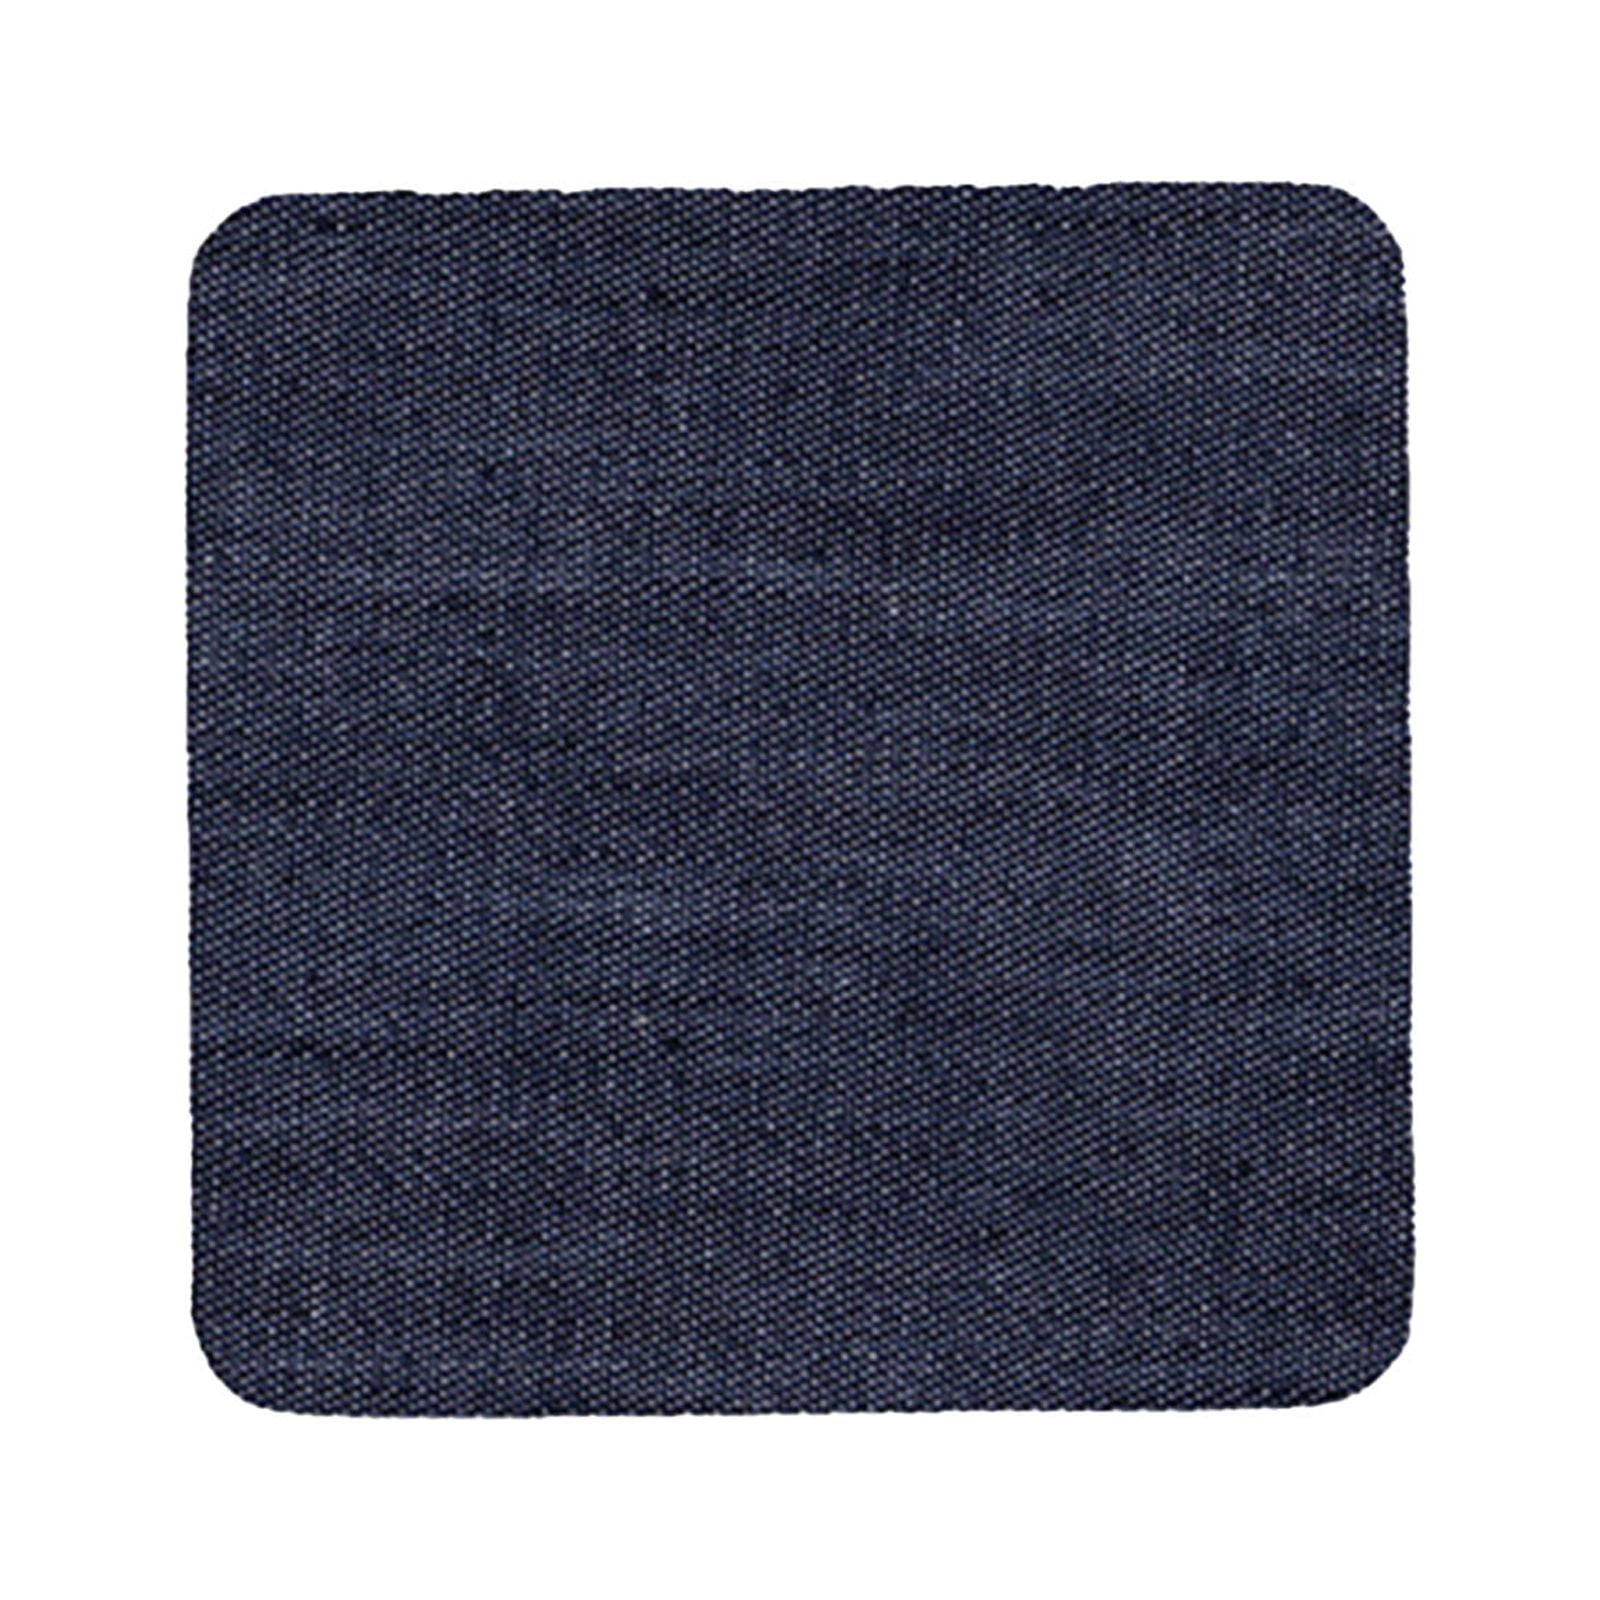 Bastex Exceptional Quality Iron-On Jean Patches Repair Kit. Inside & Outside. Made with The Strongest Glue, 100% Cotton Assorted Shades of Blue. 12